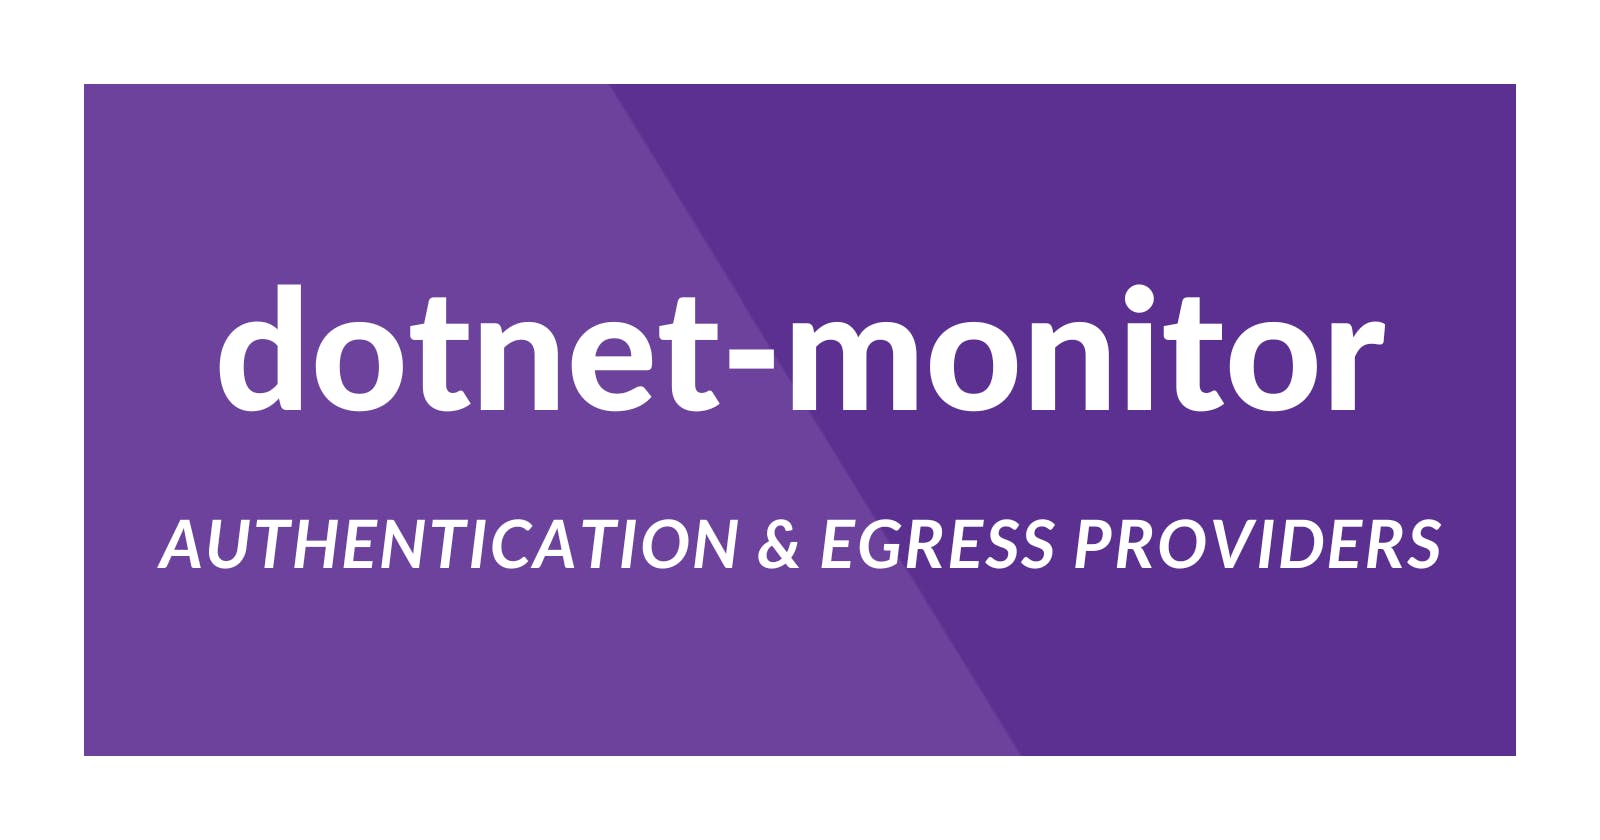 dotnet-monitor: Authentication and Egress Providers